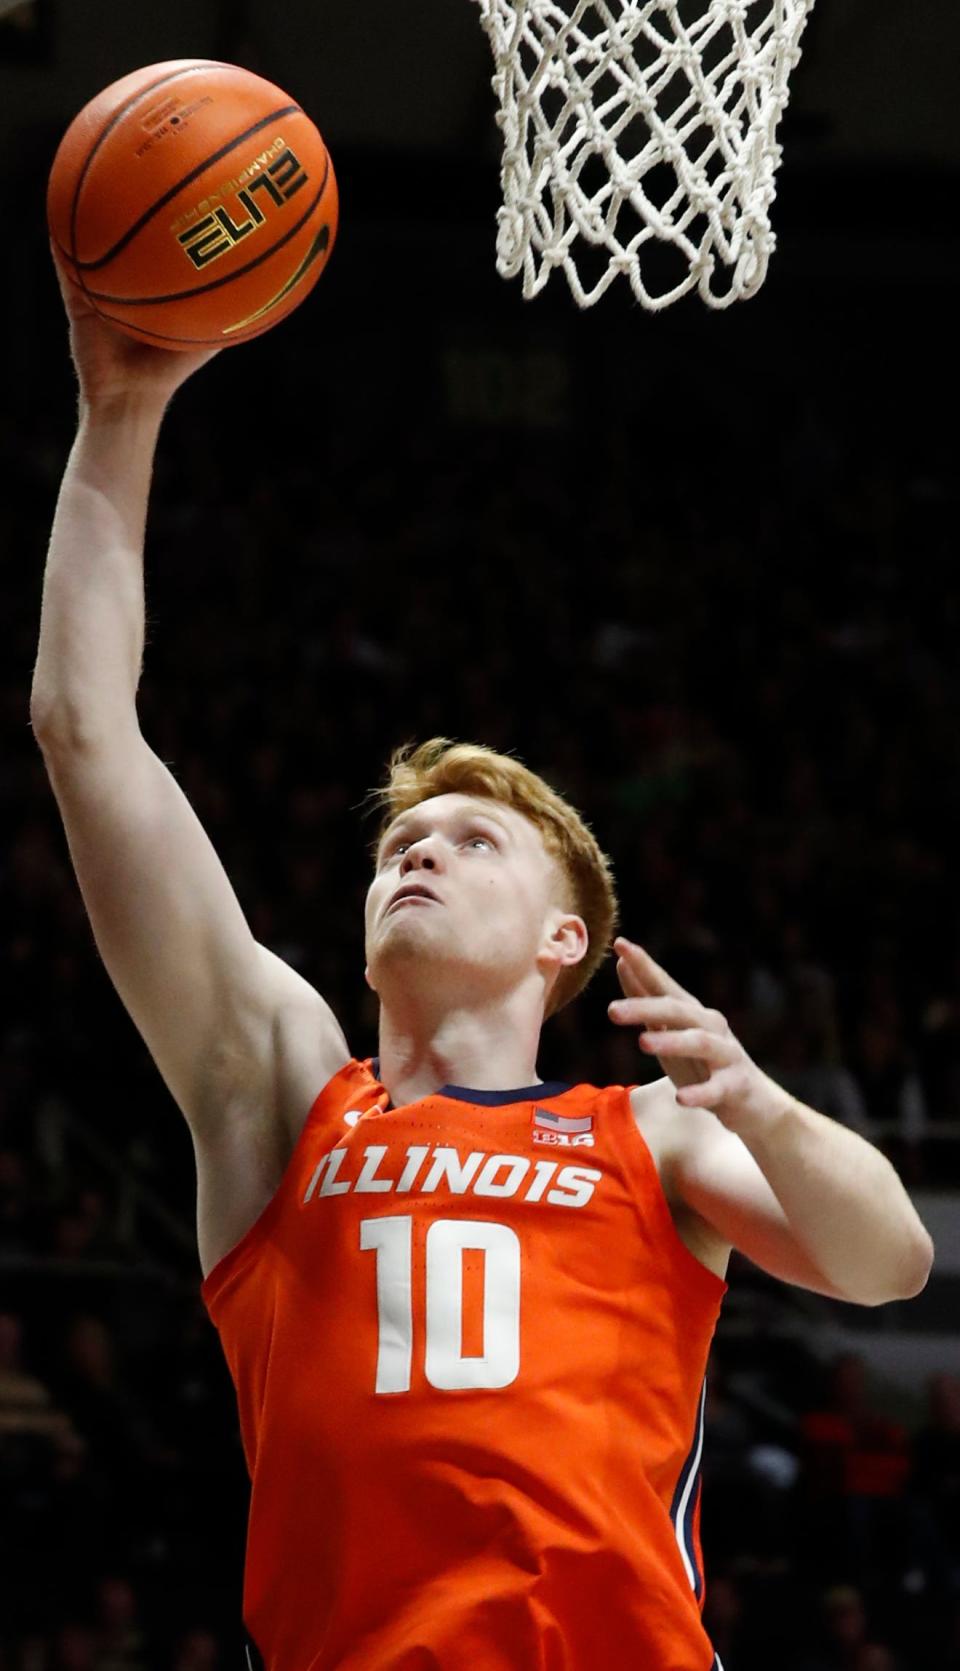 Illinois Fighting Illini guard Luke Goode (10) shoots the ball during the NCAA men’s basketball game against the Purdue Boilermakers, Sunday, March 5, 2023, at Mackey Arena in West Lafayette, Ind. The Purdue Boilermakers won 76-71.